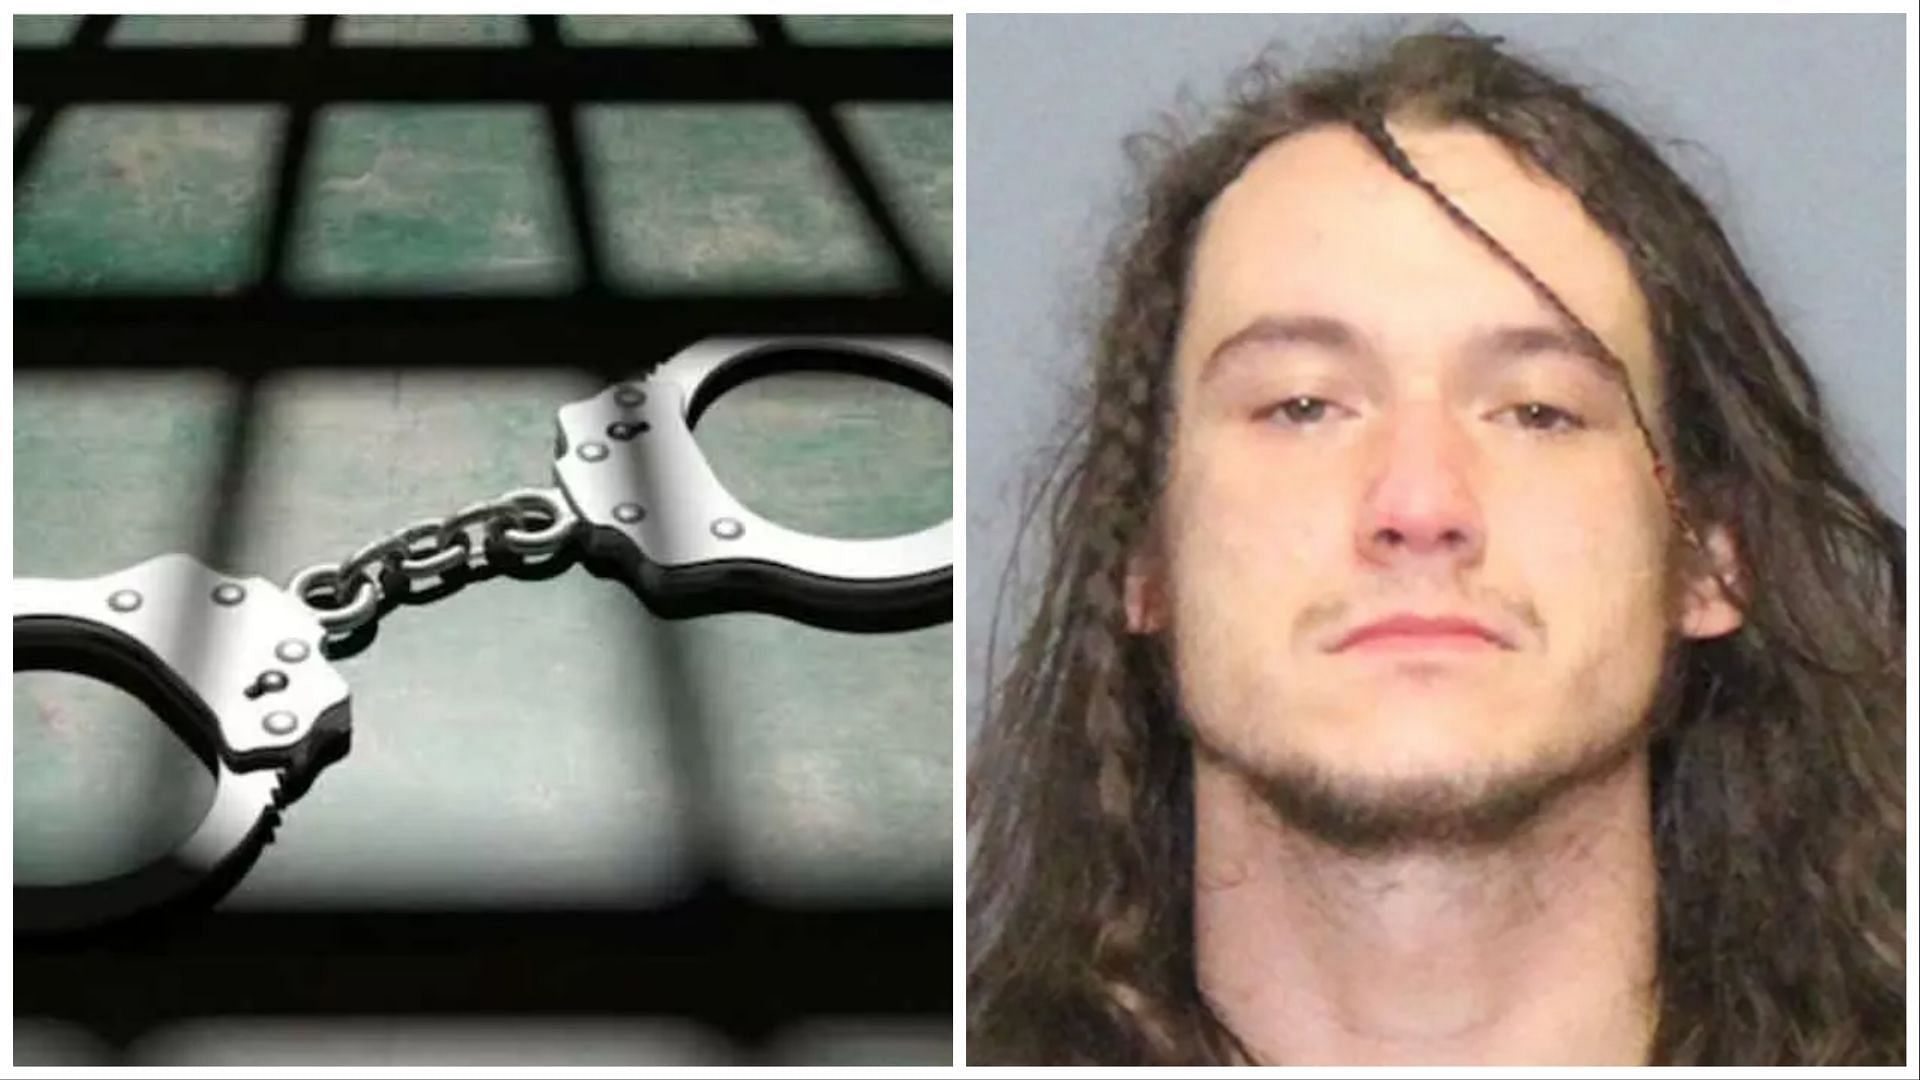 Bentley claimed he was being targeted by a religious cult (images via Shutterstock/North Carolina authorities)